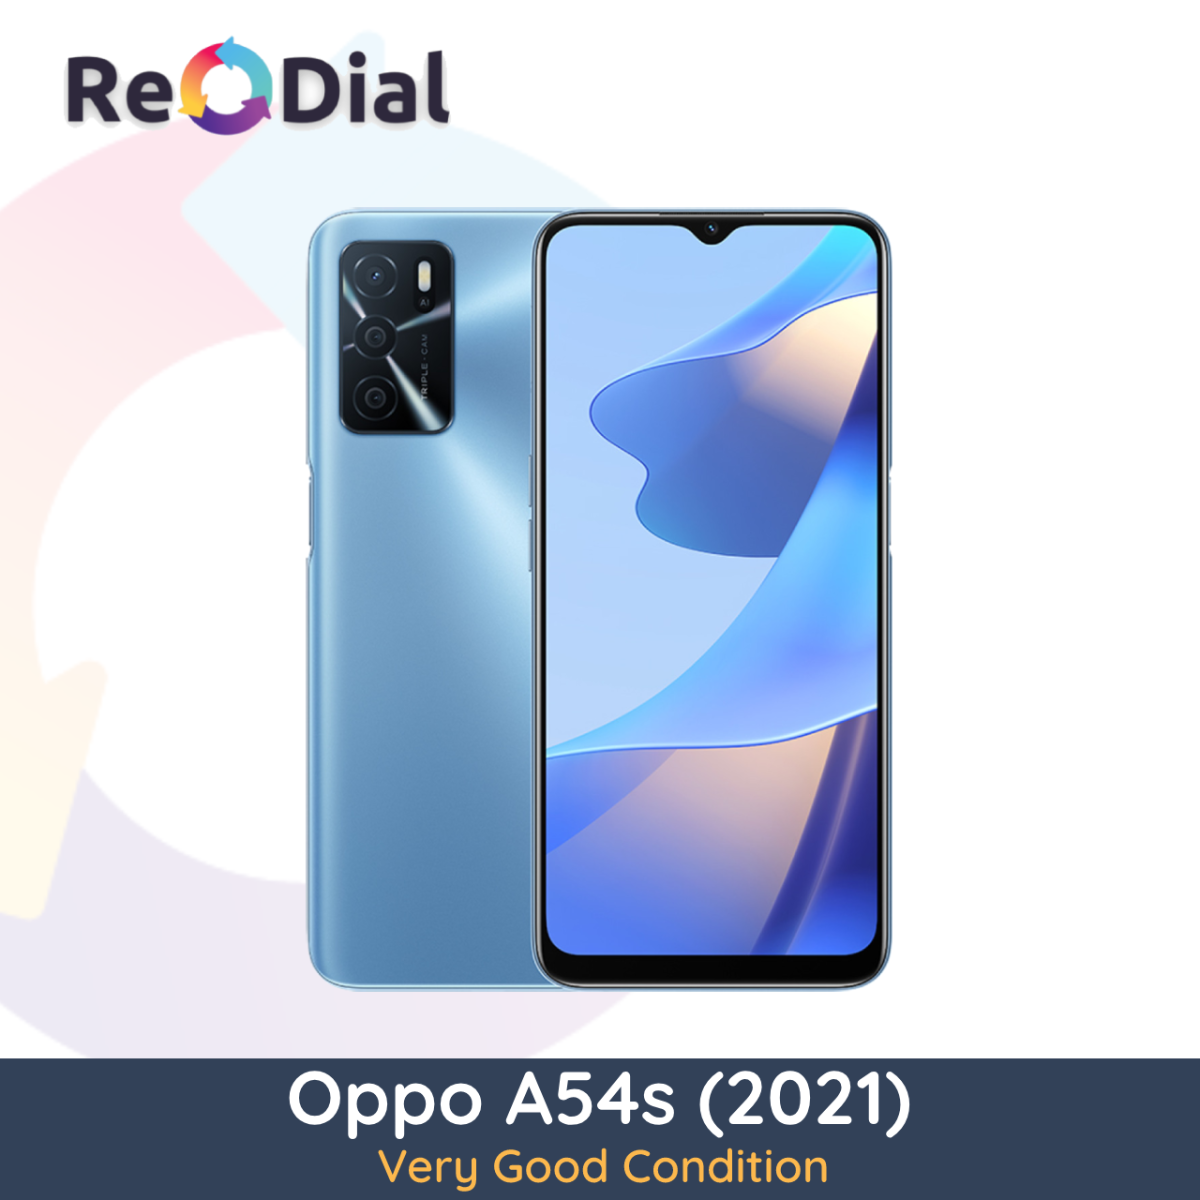 Oppo A54s (2021) - Very Good Condition